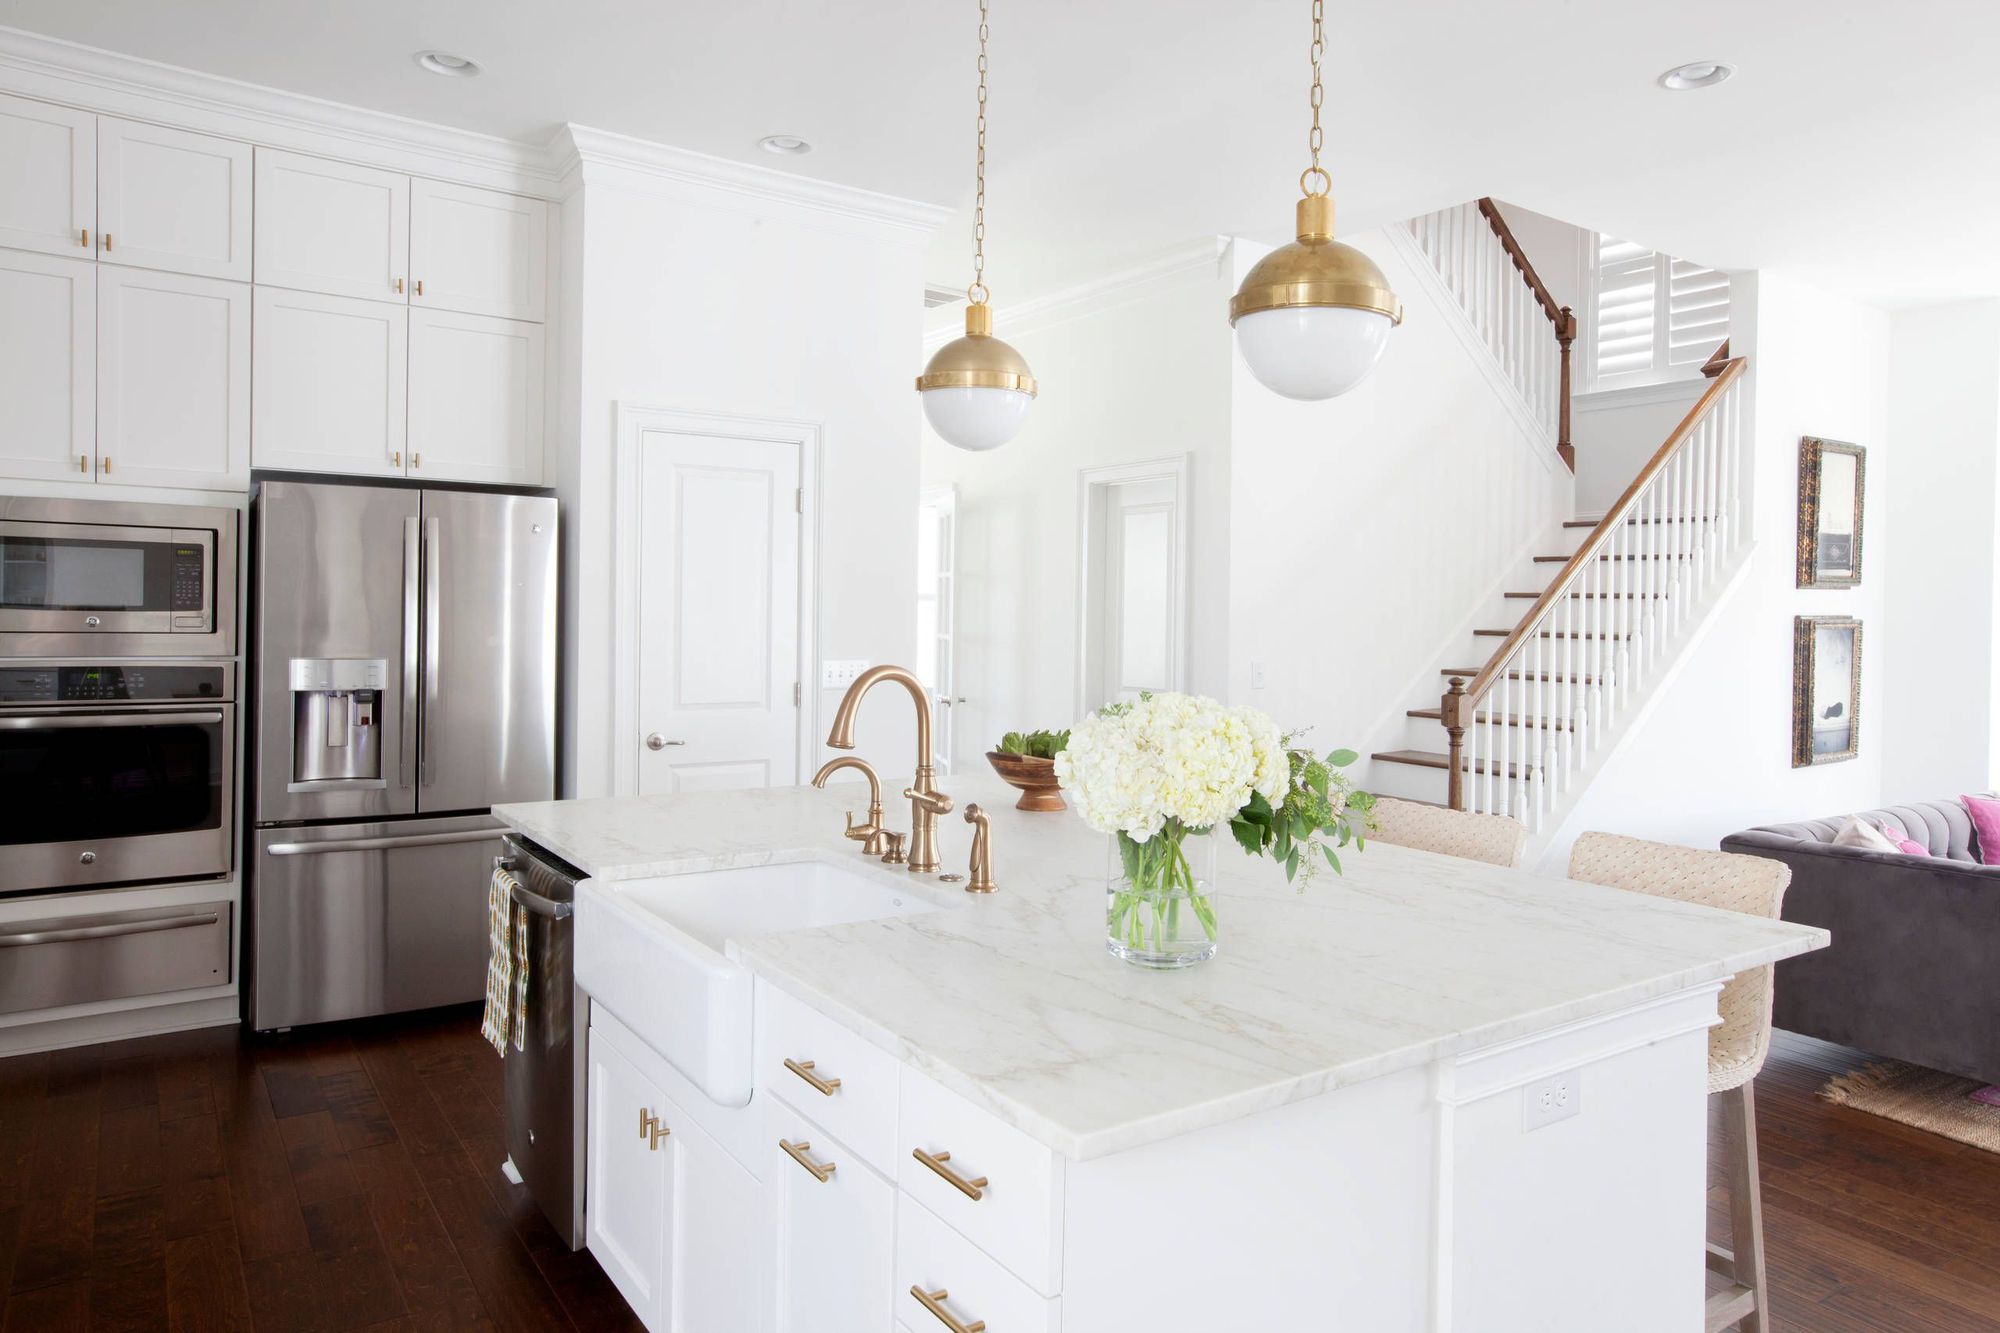 White continues to be the top color choice for kitchen cabinets, but its dominance is waning.